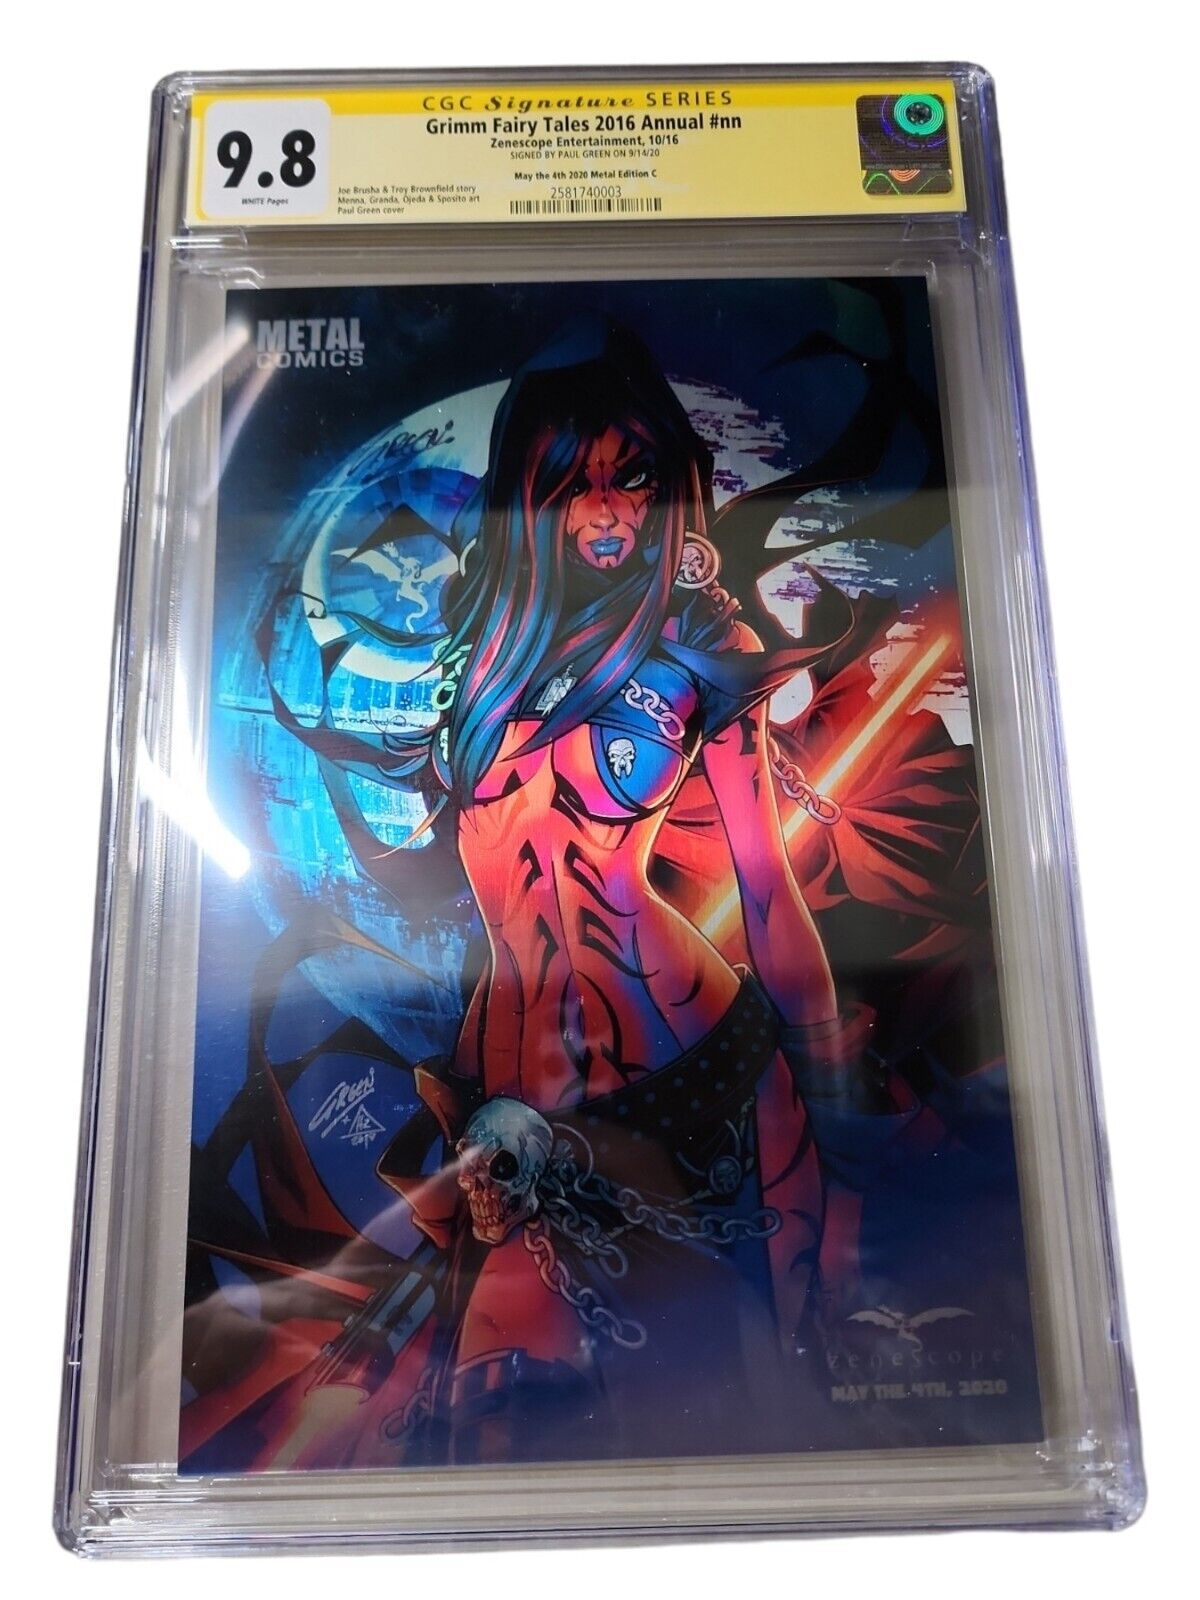 Grimm Fairy Tales 2016 Annual Star Wars Metal Sith CGC 9.8 PAUL GREEN Signed